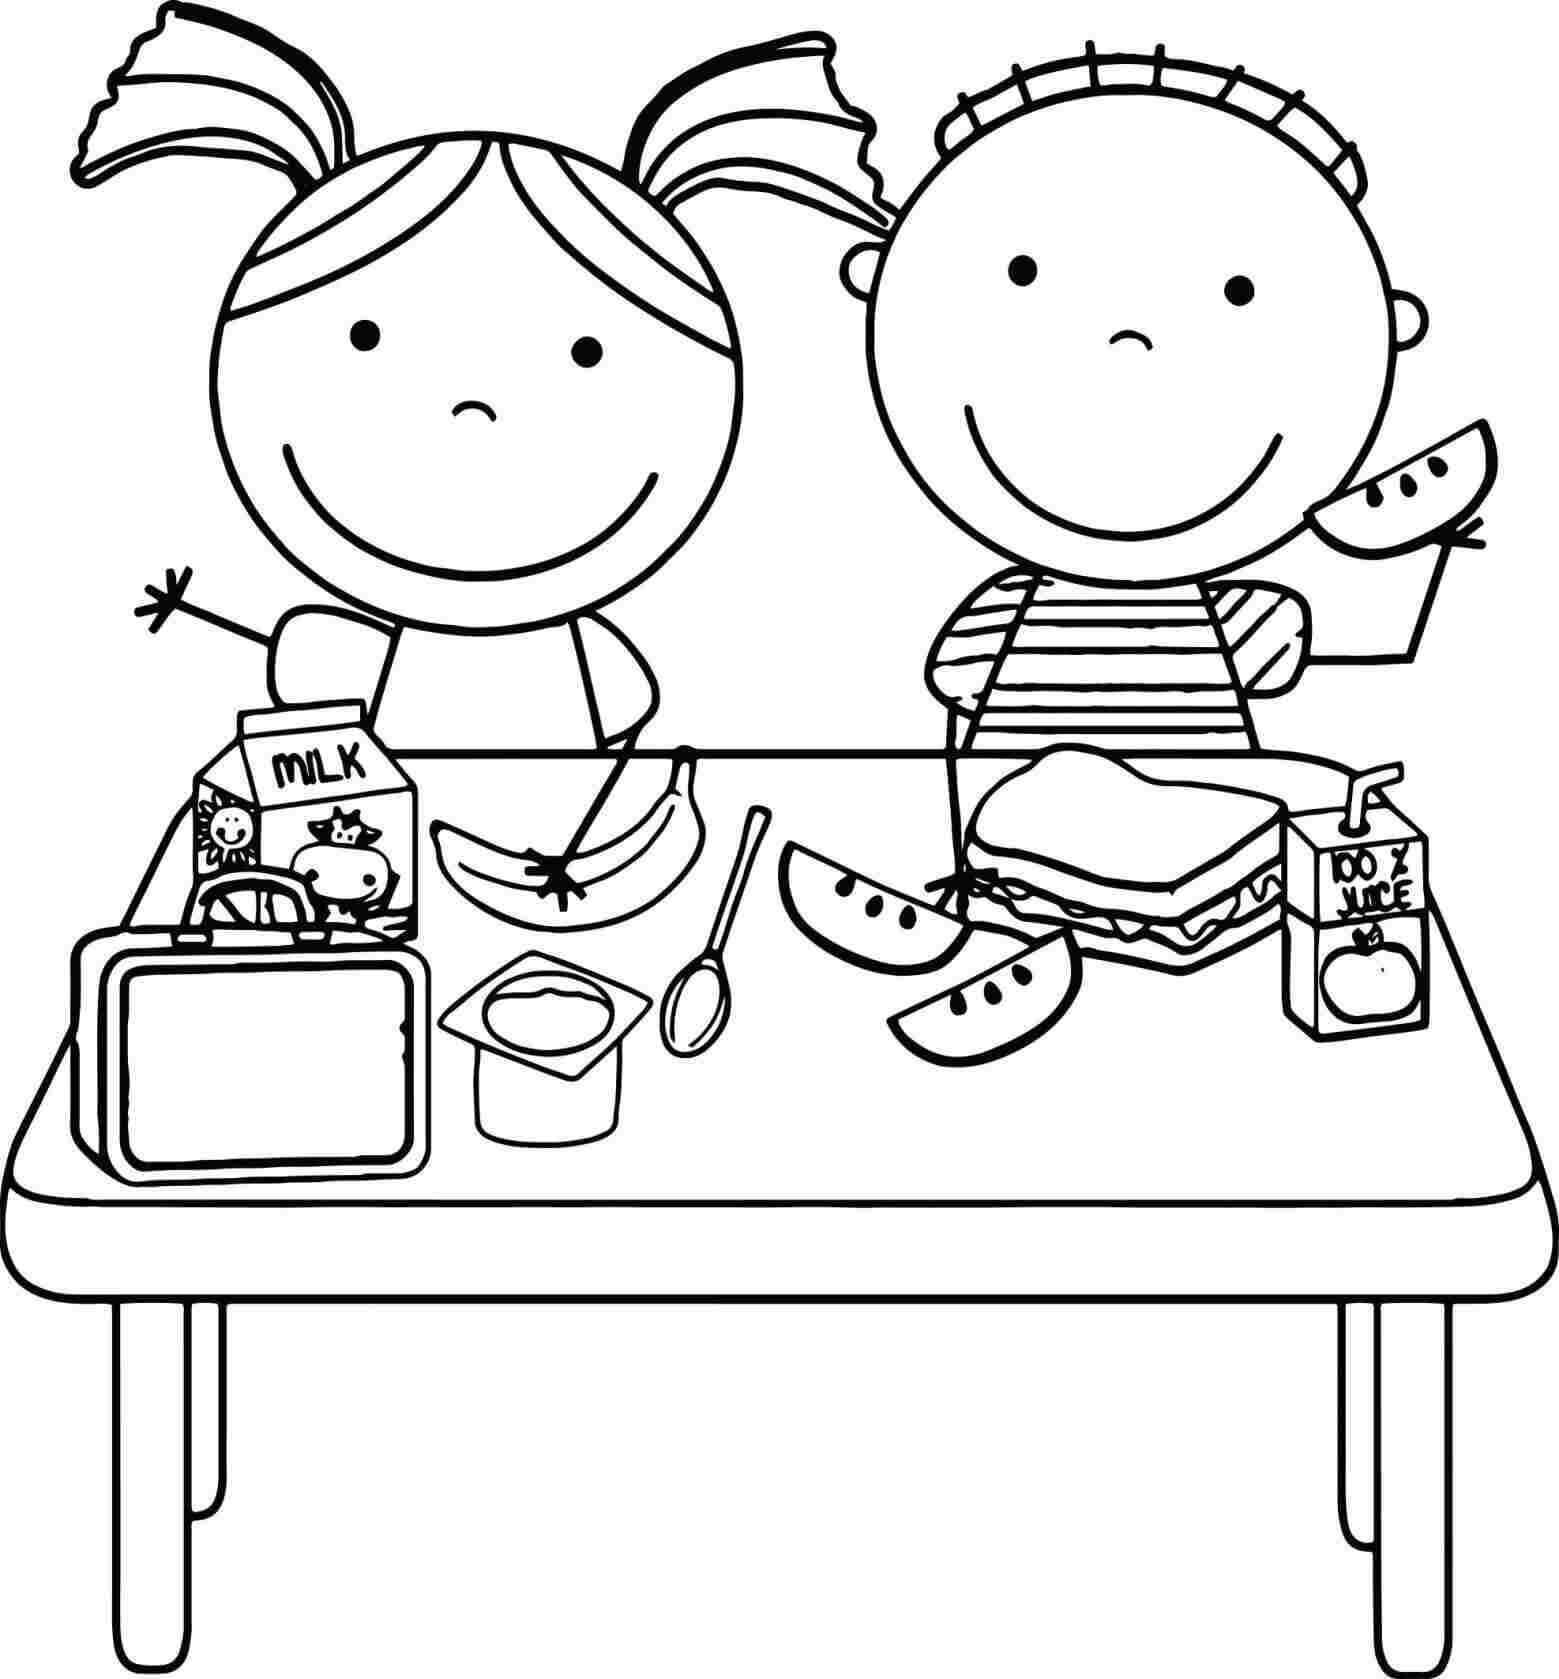 Lunch Coloring Page